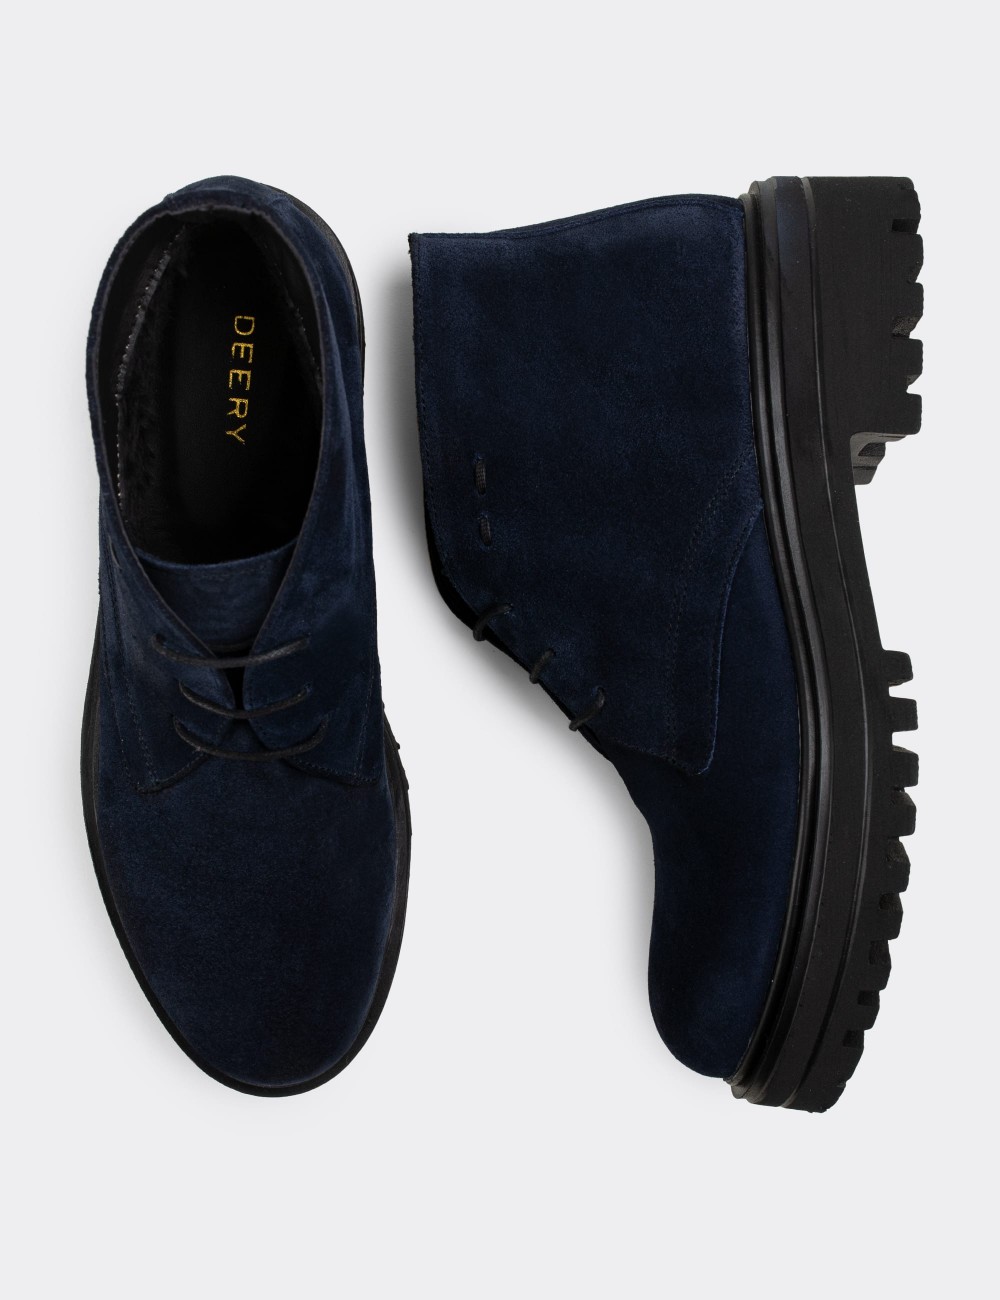 Navy Suede Leather Desert Boots - 01847ZLCVE01